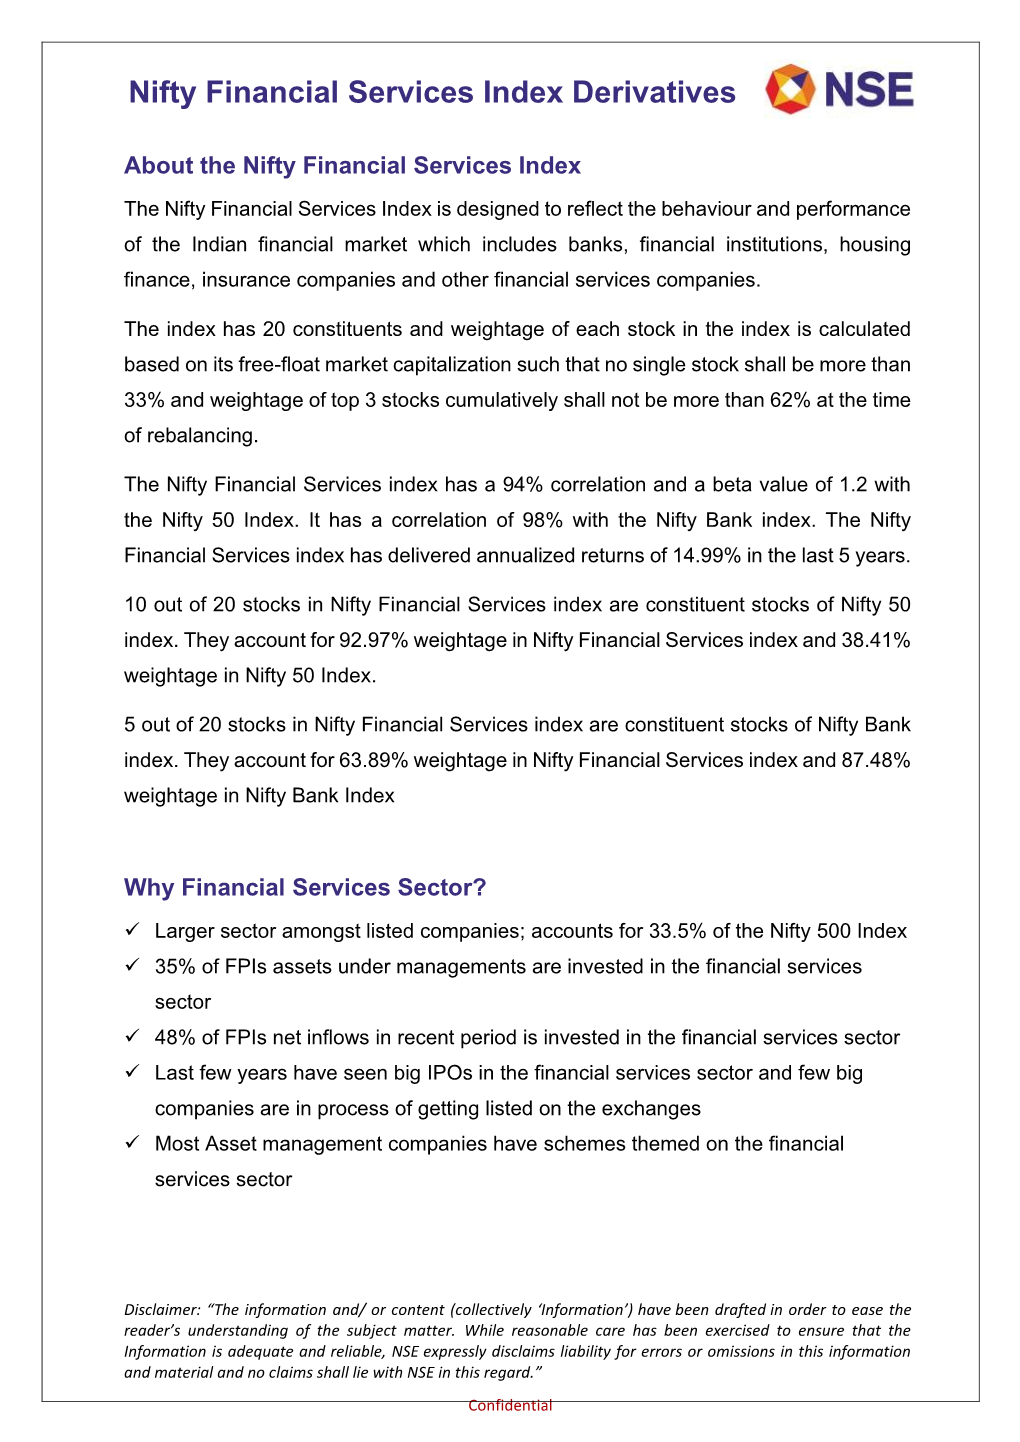 Nifty Financial Services Index Derivatives